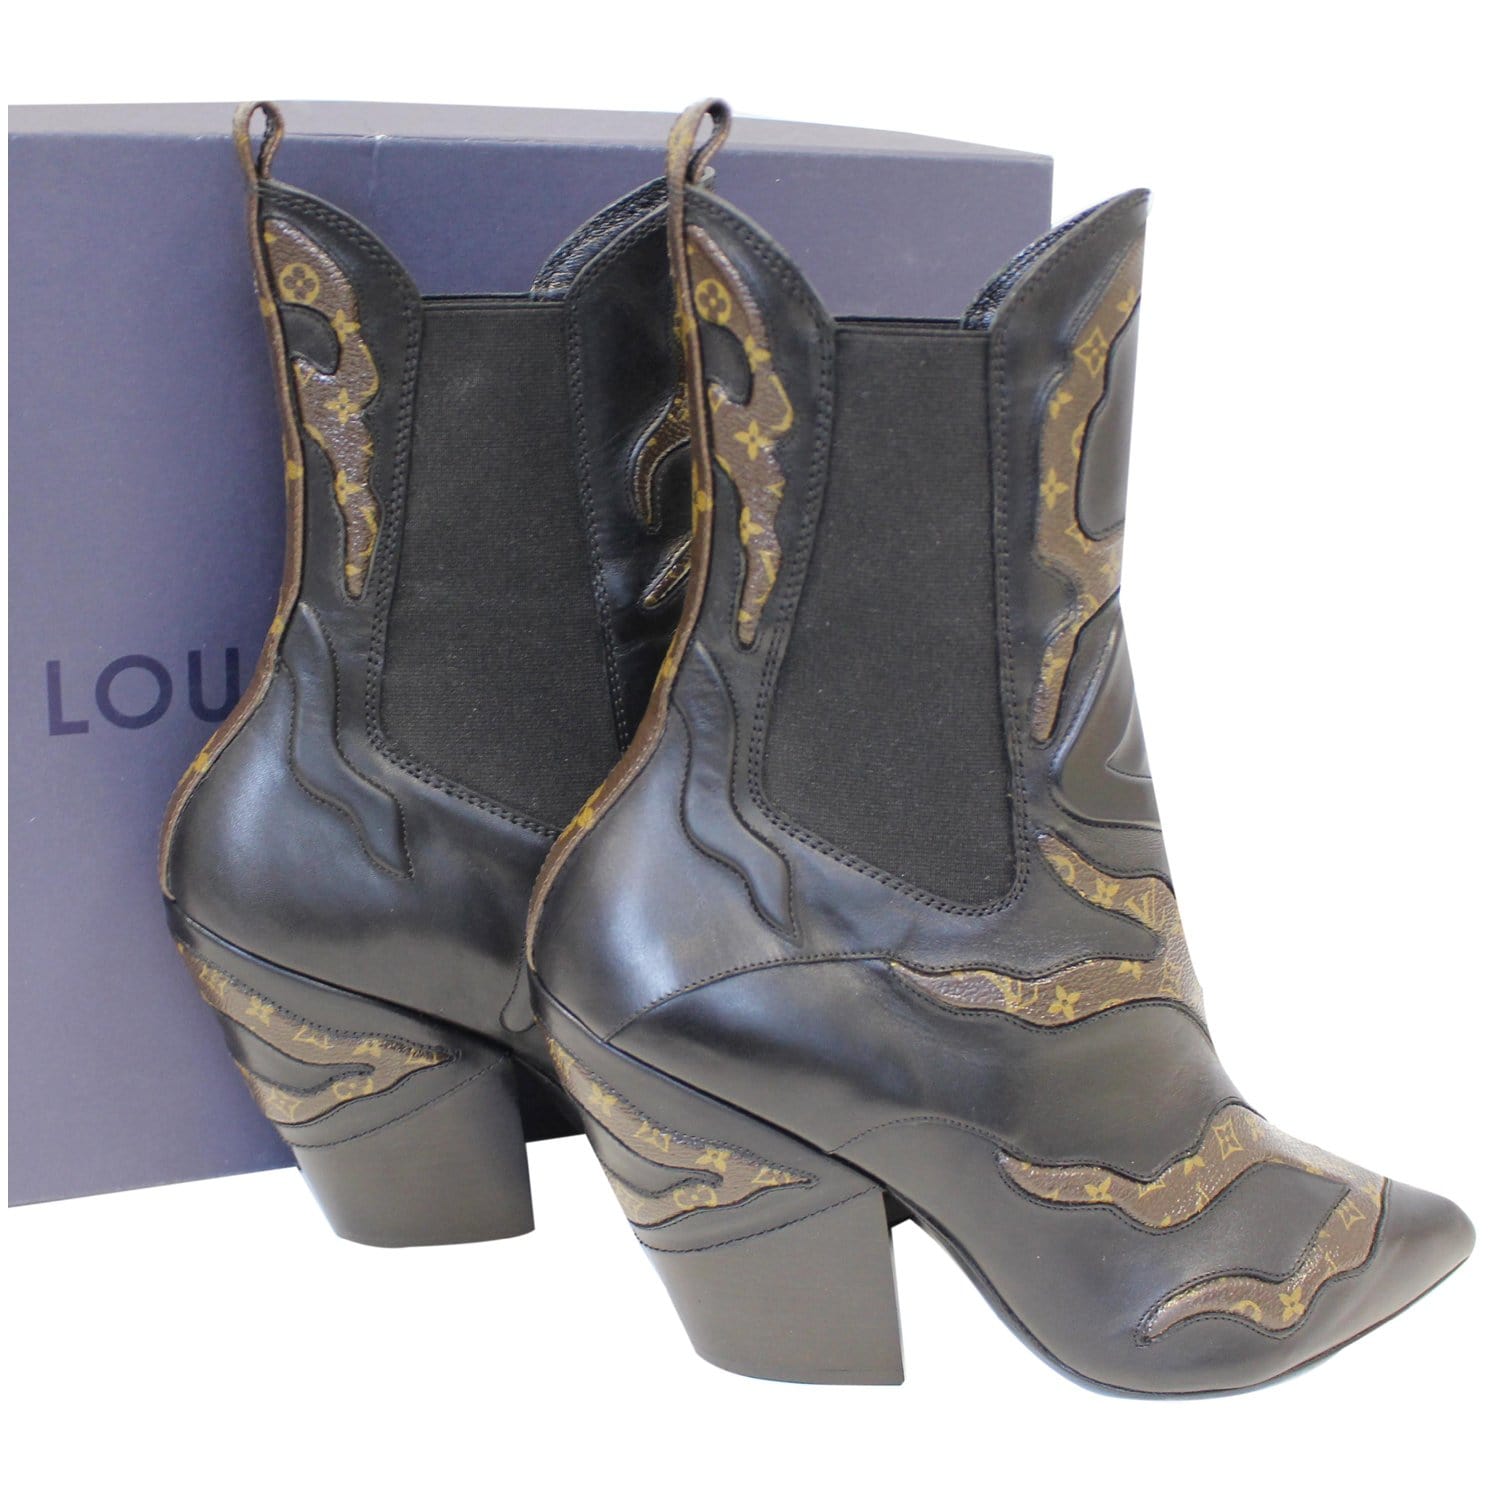 1 new message  Luxury leather boots, Boots, Louis vuitton boots